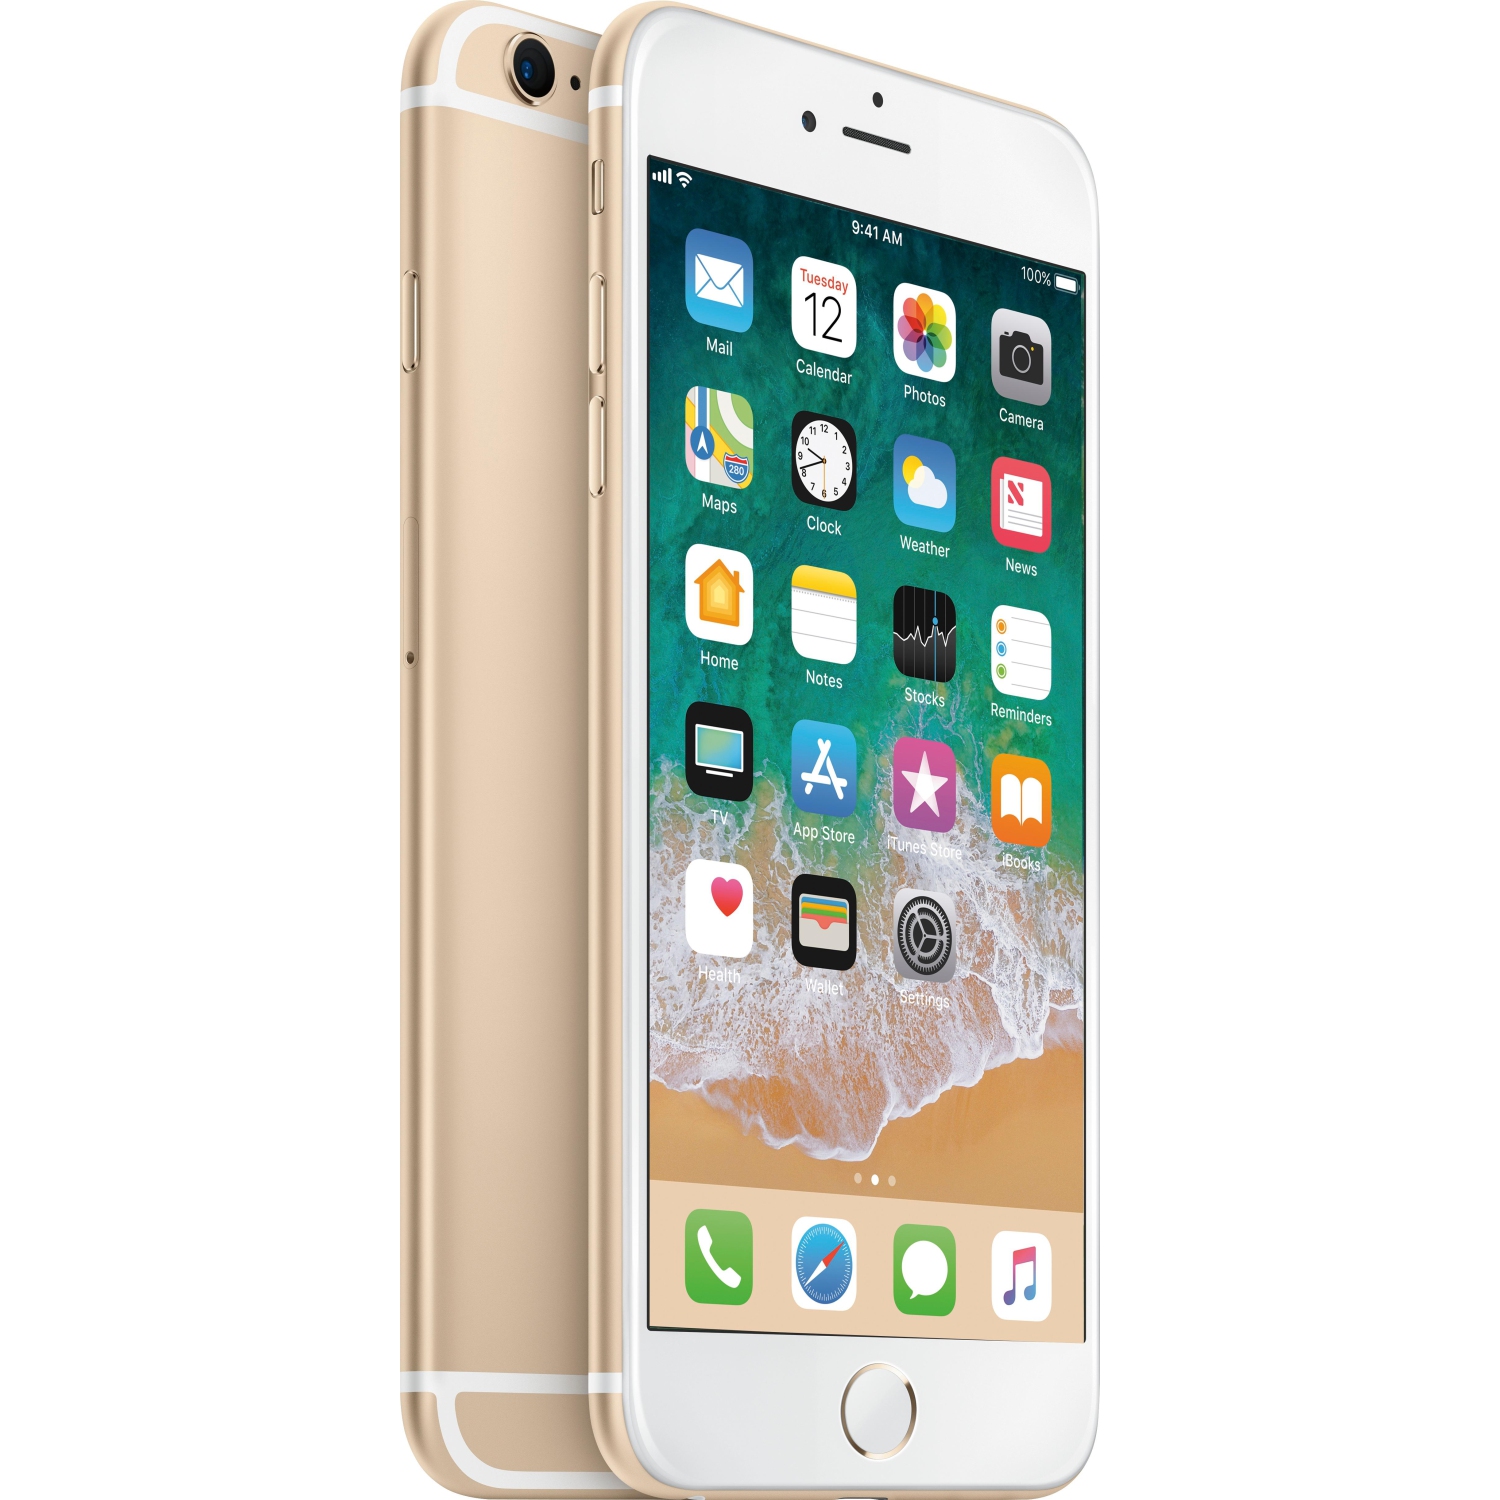 Apple iPhone 6s Plus 128GB Smartphone - Gold - Unlocked - Manufacturer Certified Pre-Owned